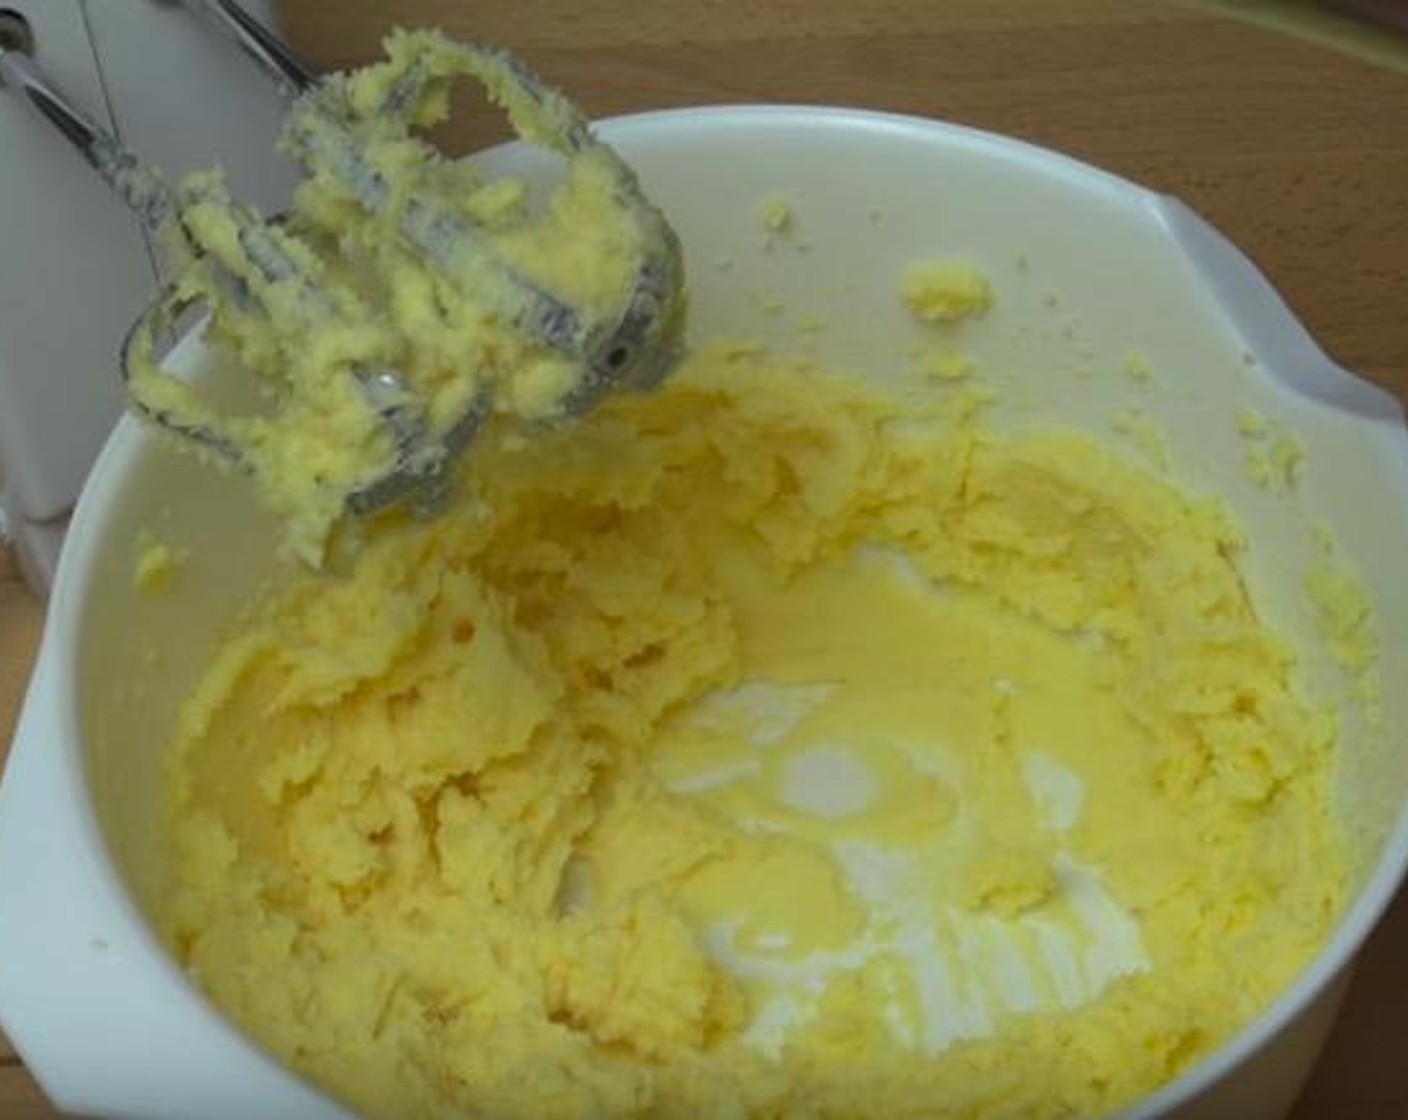 step 1 In a mixing bowl, add Caster Sugar (3/4 cup), Butter (3/4 cup) and Vanilla Extract (1 tsp). Beat with electric mixer until creamy.